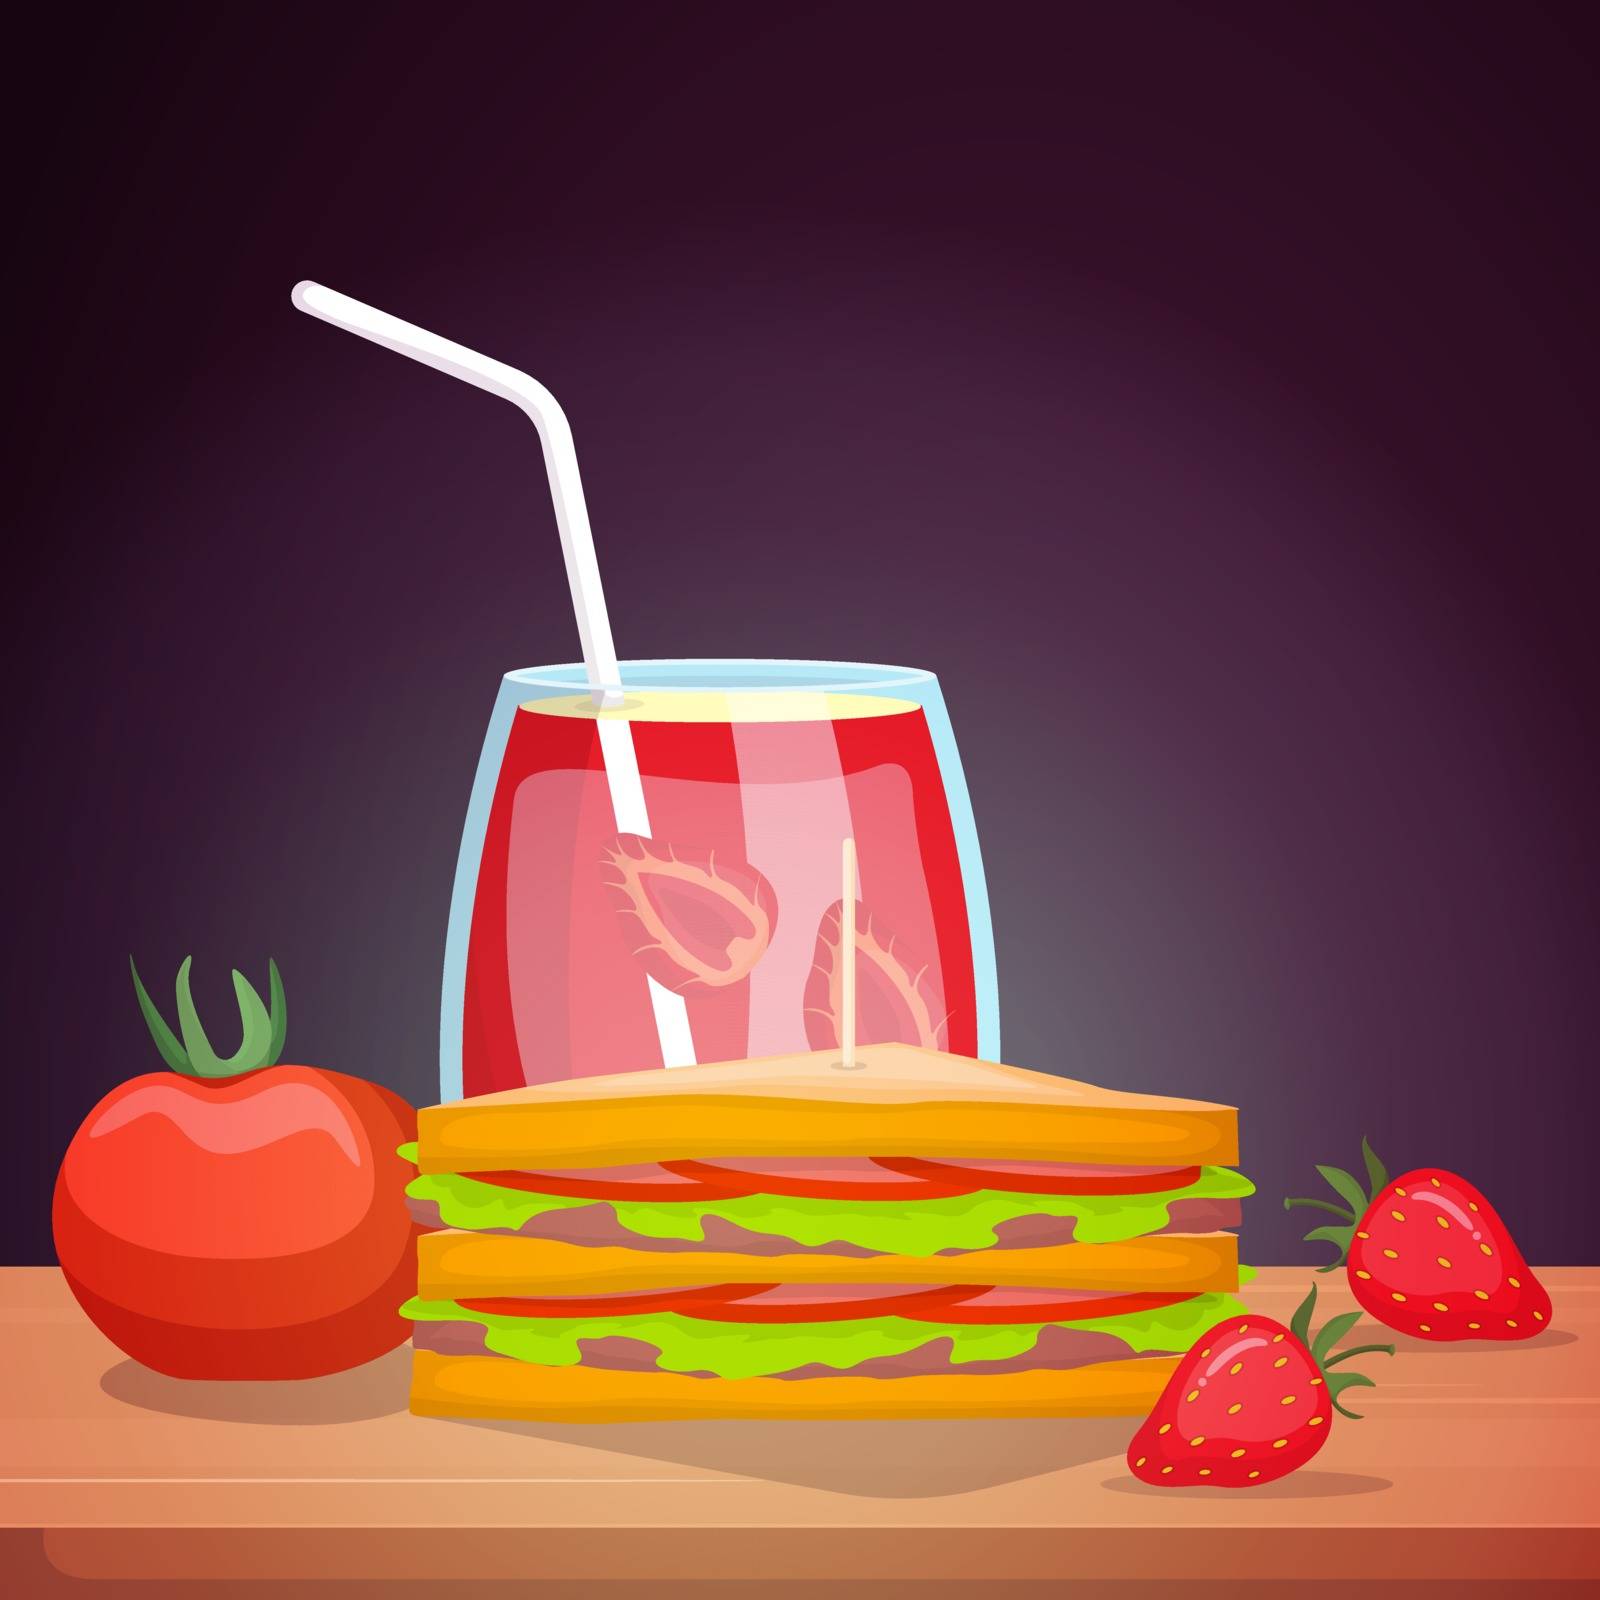 Sandwich Food Photography Delicious Tasty Menu on Table Illustration by jongcreative